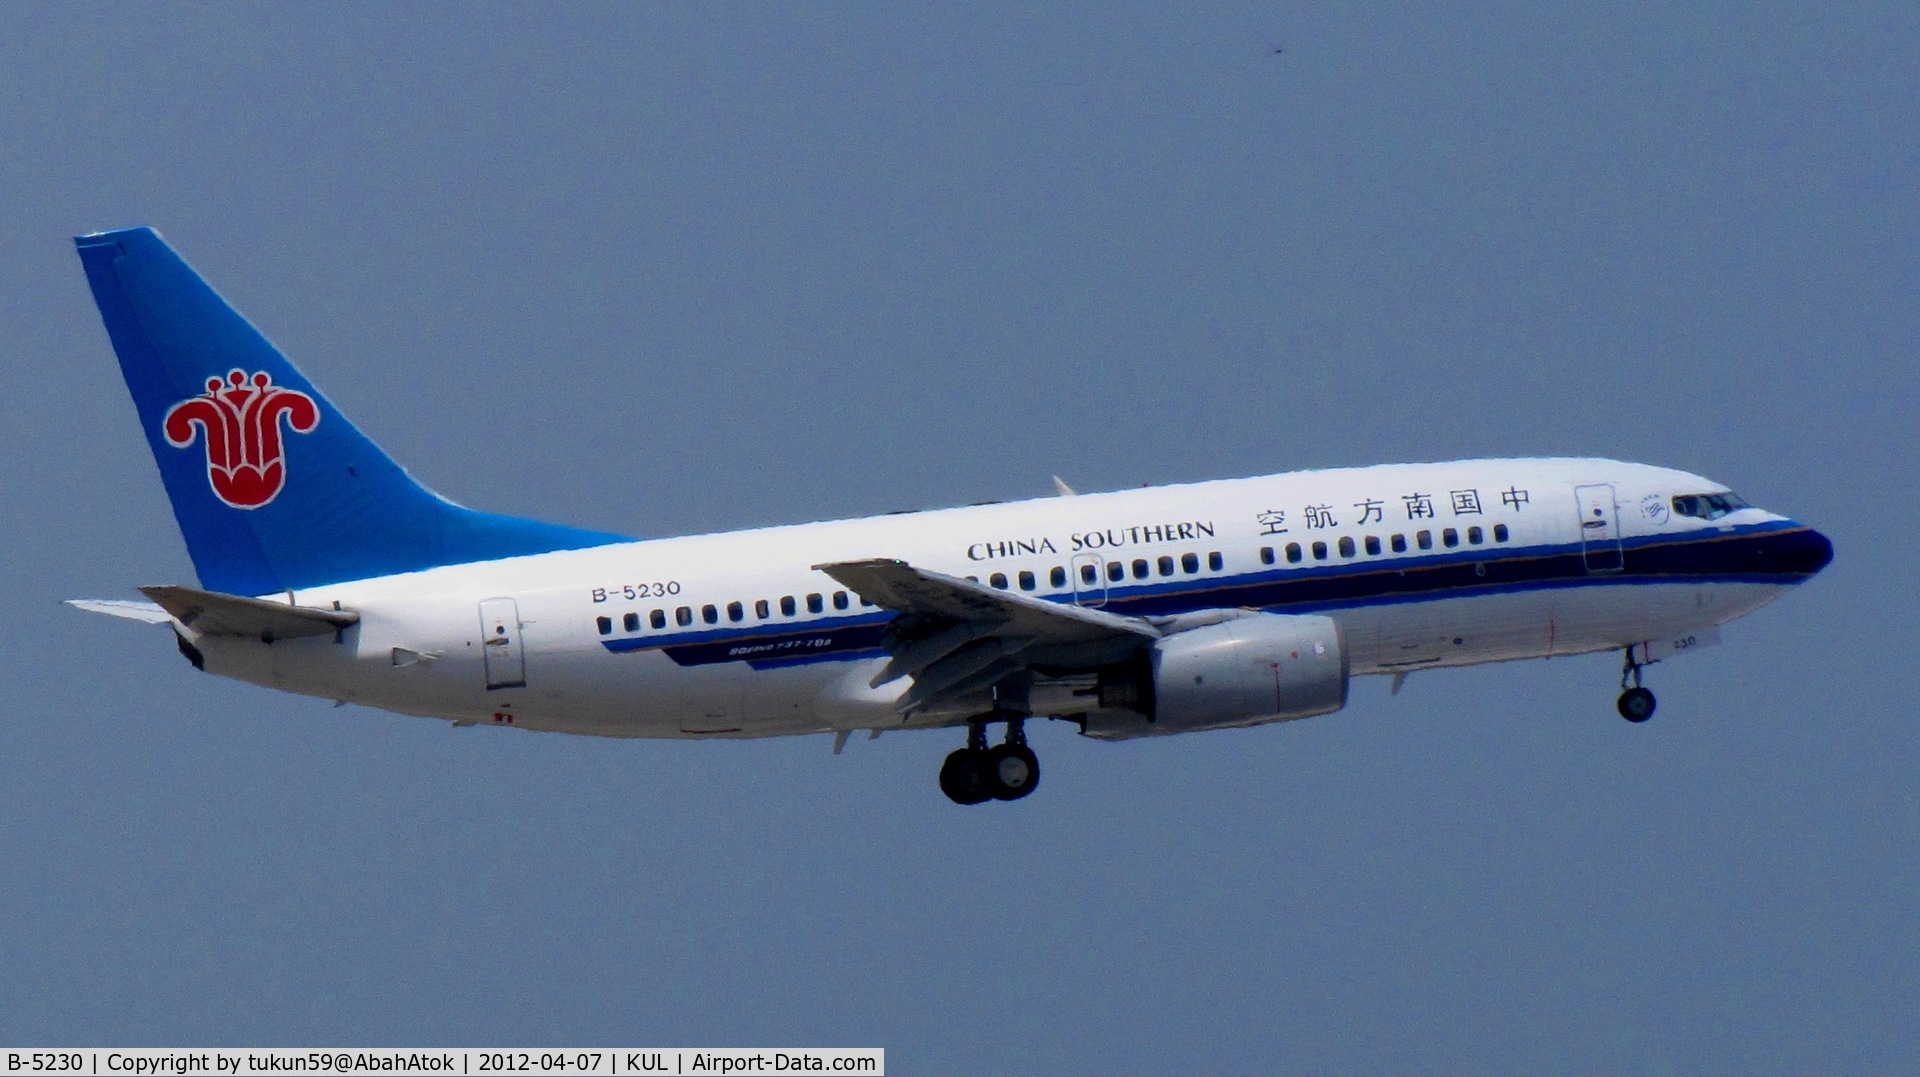 B-5230, 2006 Boeing 737-71B C/N 29371, China Southern Airlines